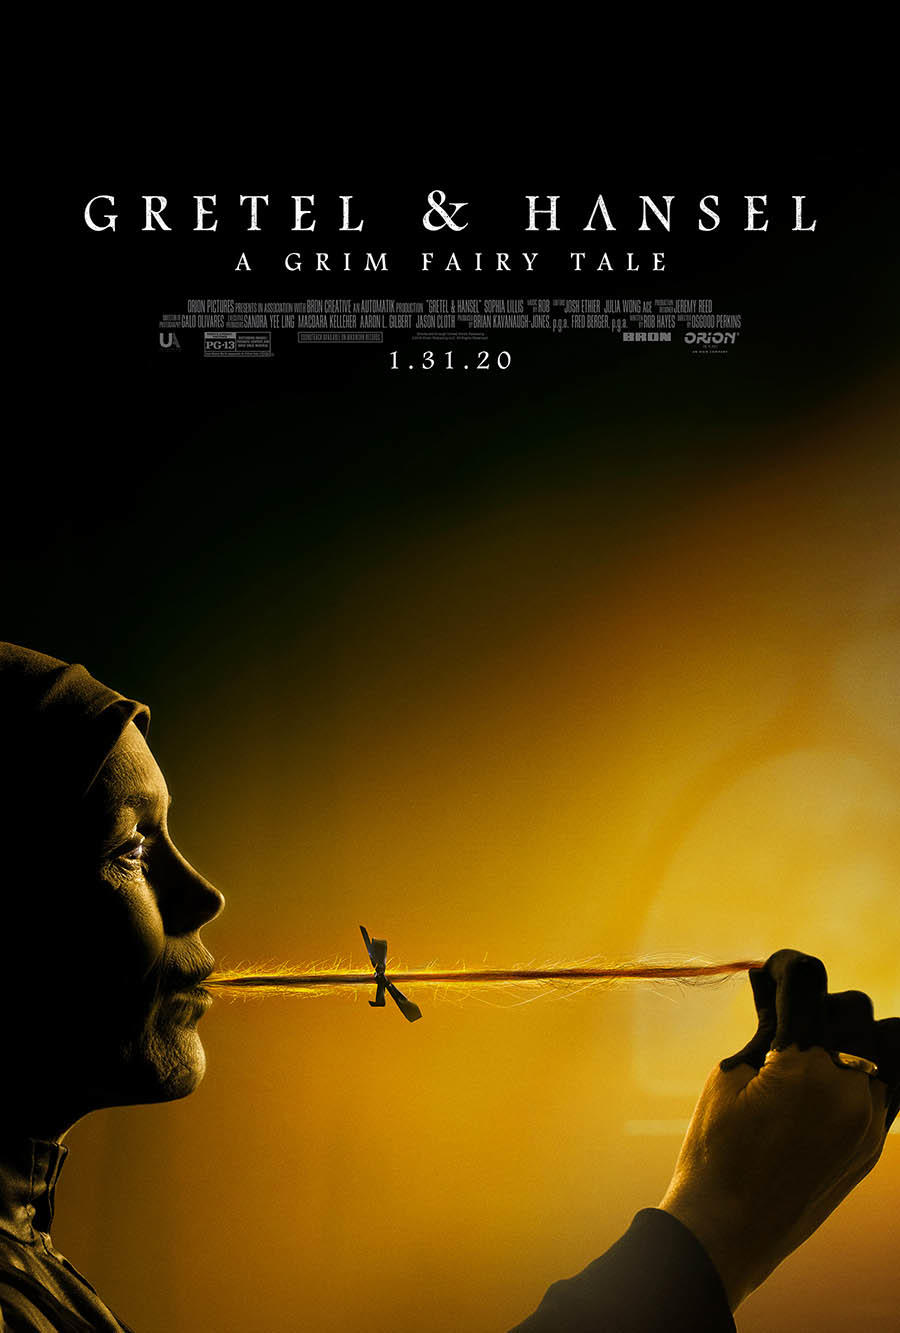 GRETEL AND HANSEL: A GRIM FAIRY TALE MOVIE POSTER